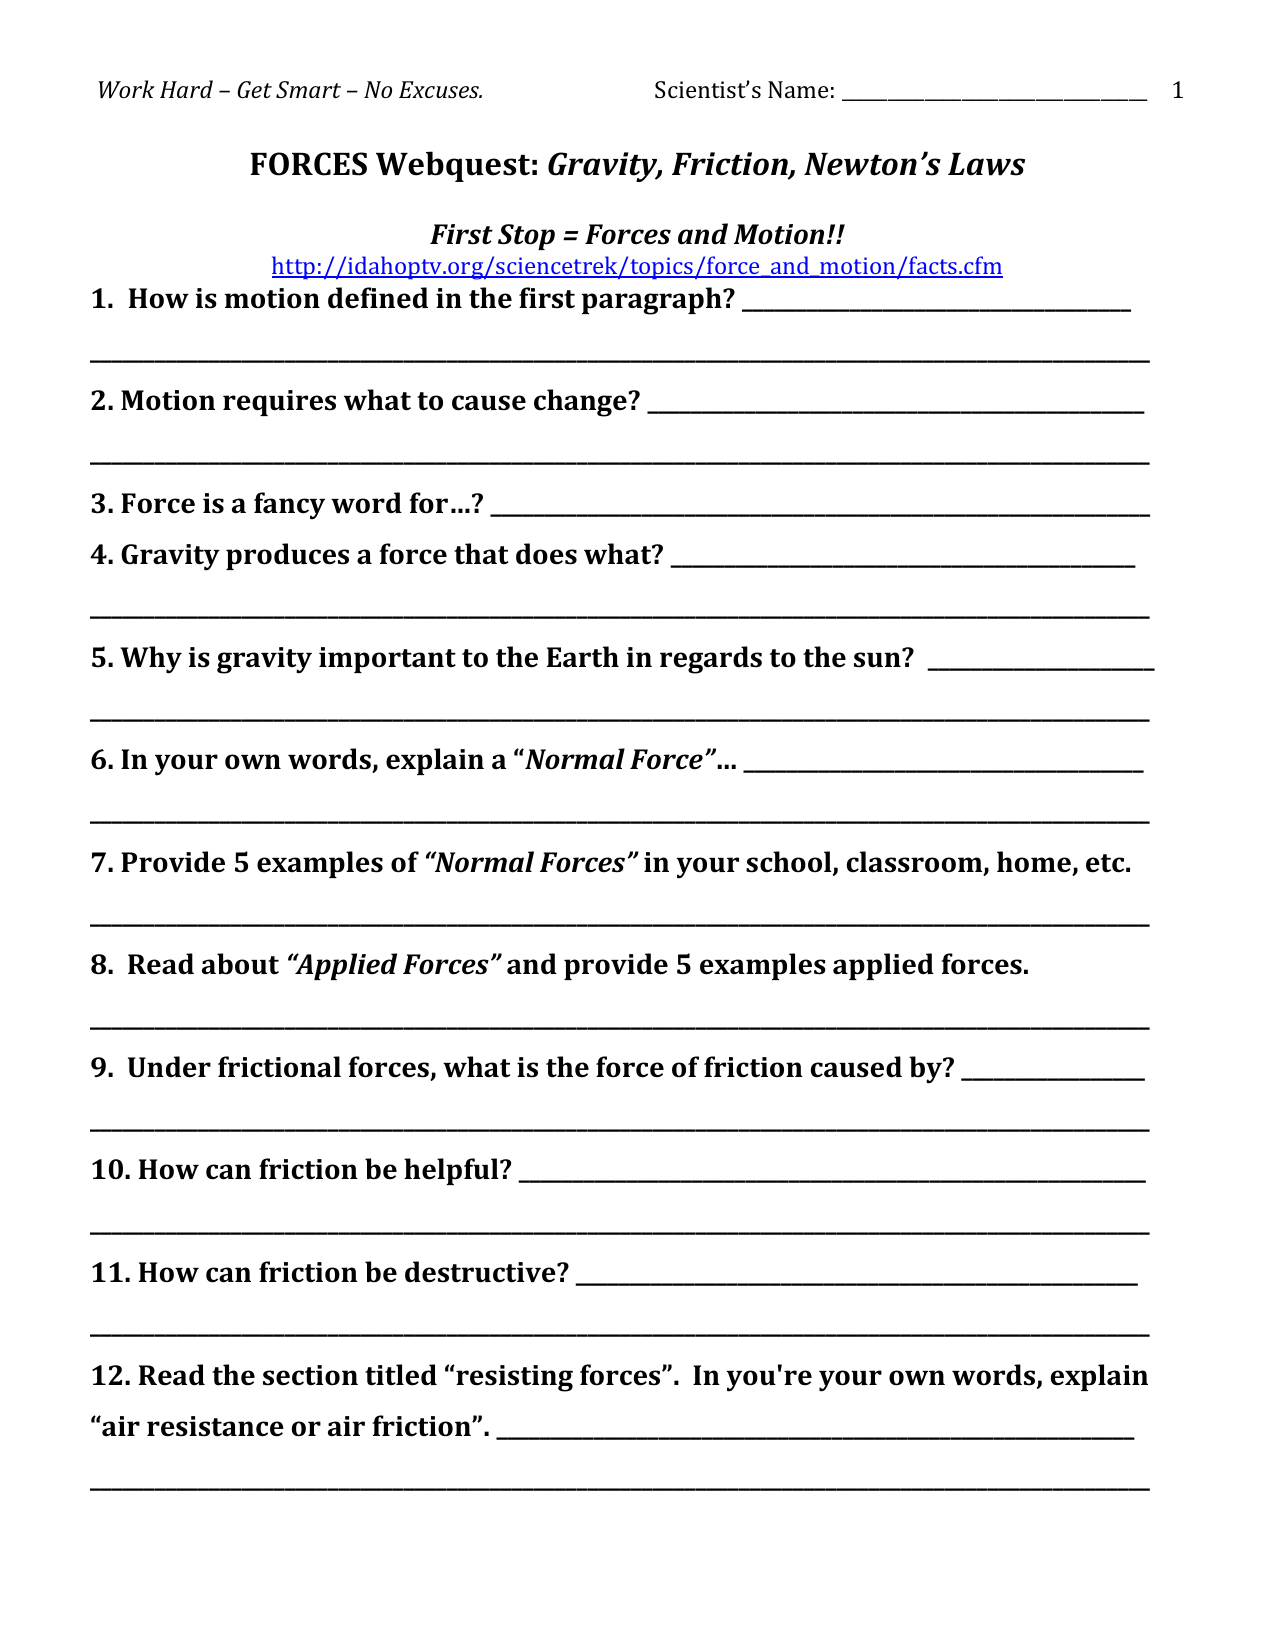 Friction And Gravity Worksheet Answers - Promotiontablecovers Regarding Friction And Gravity Worksheet Answers